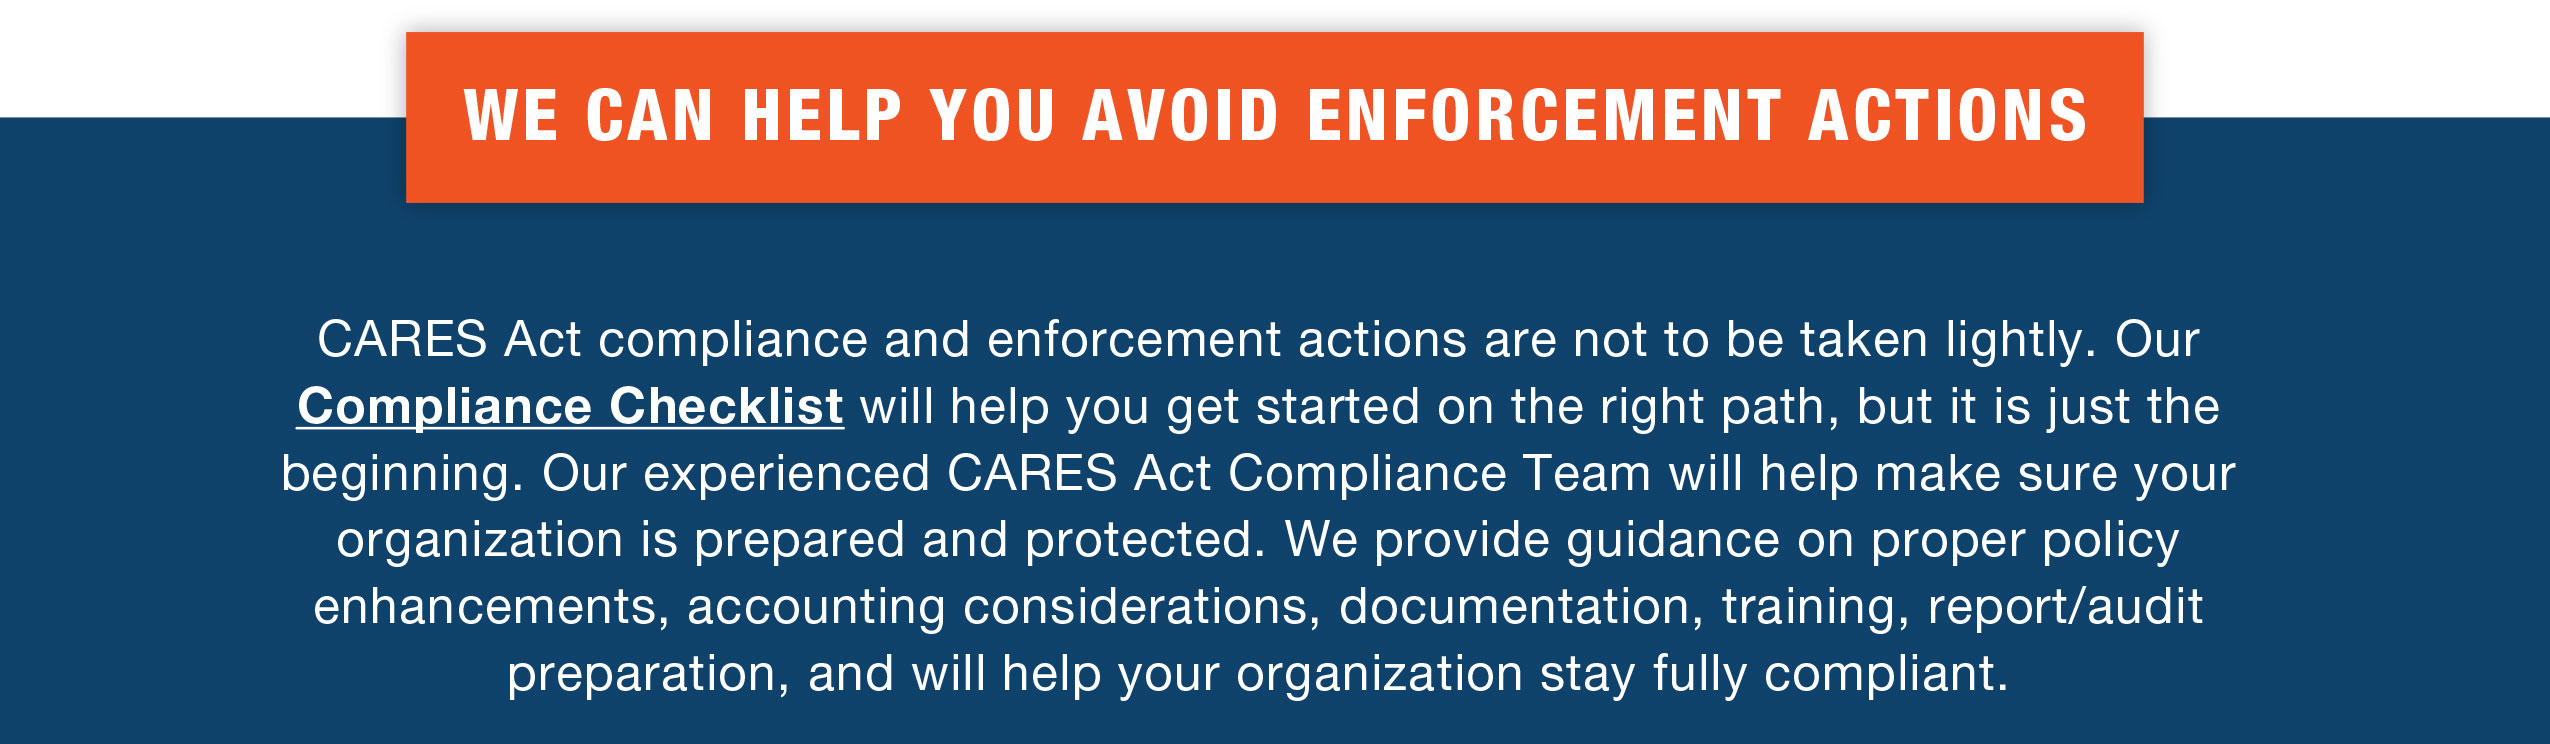 WE CAN HELP YOU AVOID ENFORCEMENT ACTIONS

CARES Act compliance and enforcement actions are not to be taken lightly. Our Compliance Checklist will help you get started on the right path, but it is just the beginning. Our experienced CARES Act Compliance Team will help make sure your organization is prepared and protected. We provide guidance on proper policy enhancements, accounting considerations, documentation, training, report/audit preparation, and will help your organization stay fully compliant.